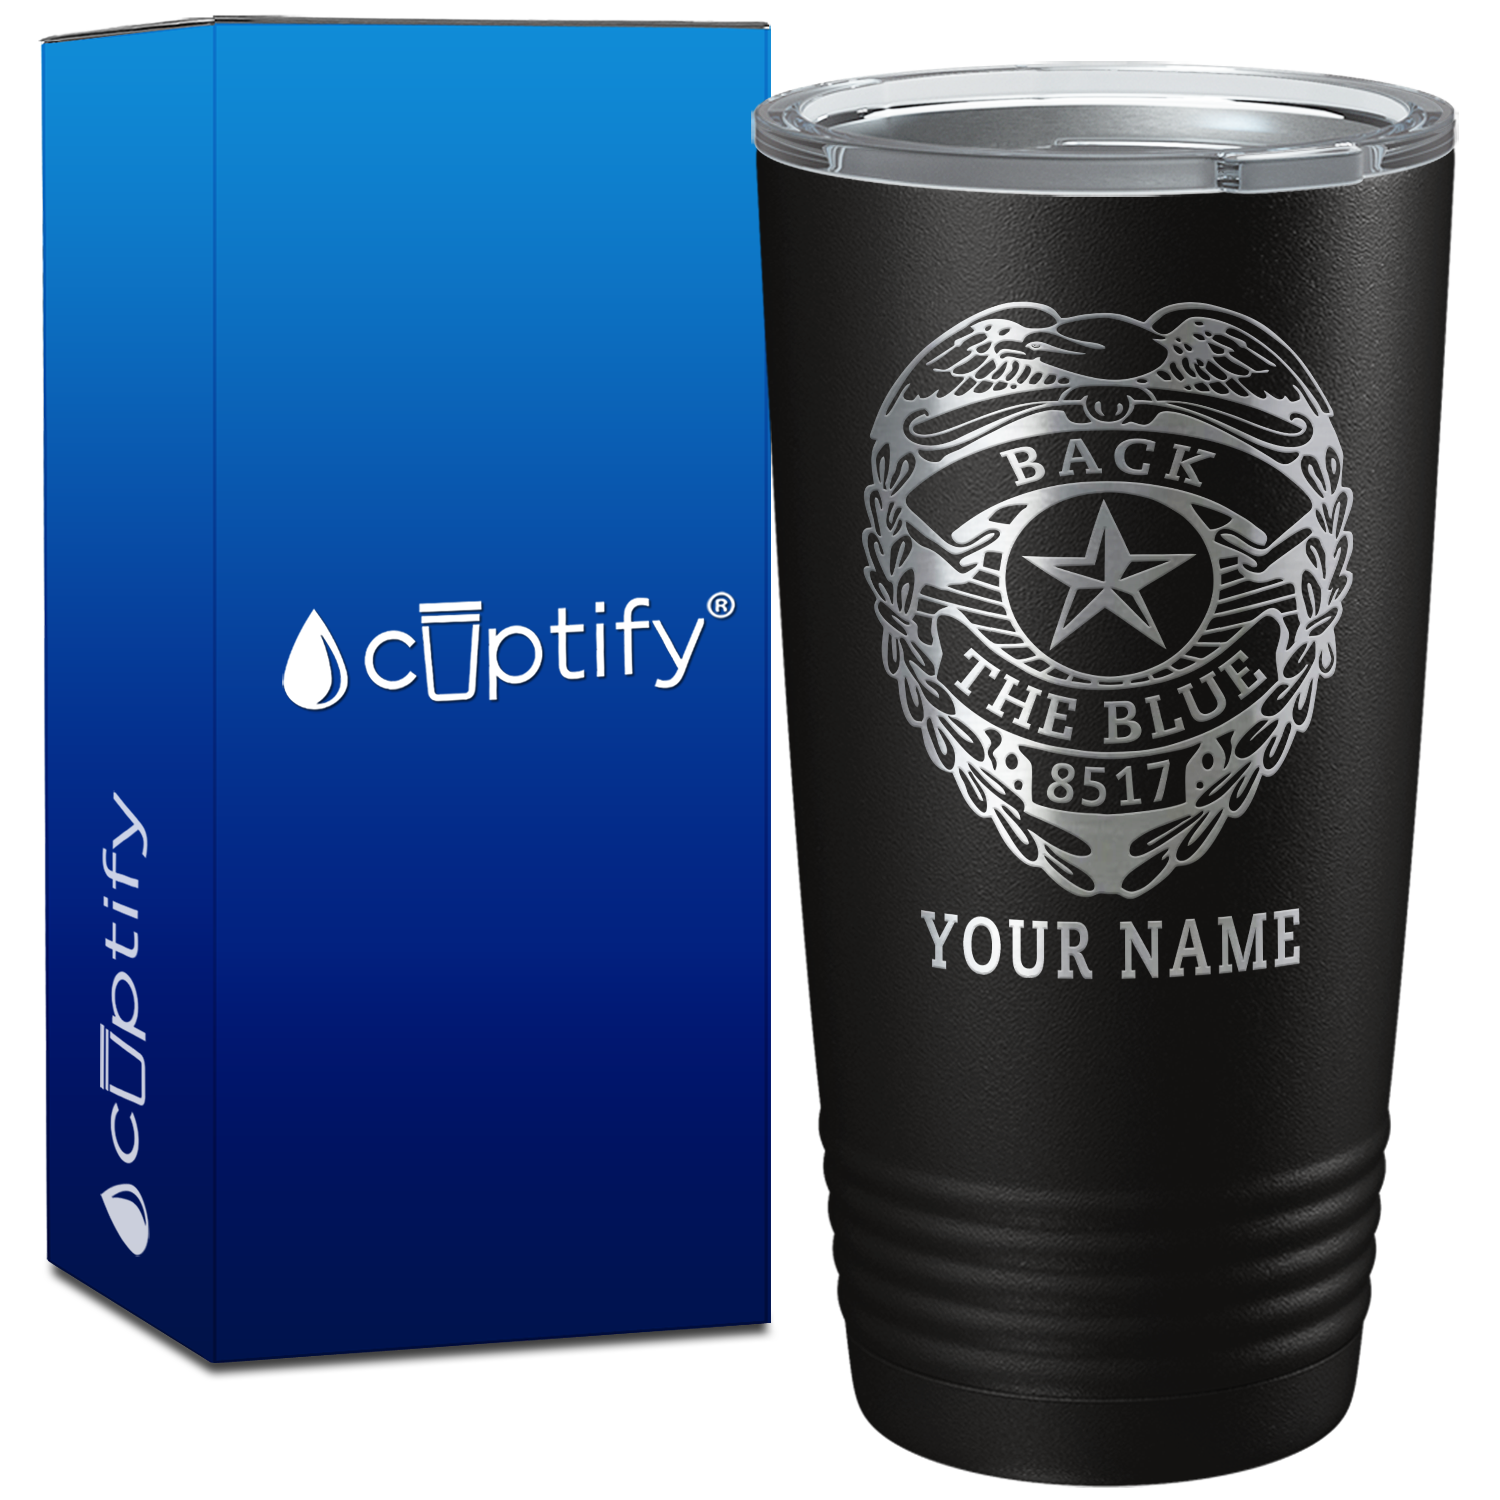 Personalized Police Badge Back The Blue on 20oz Tumbler